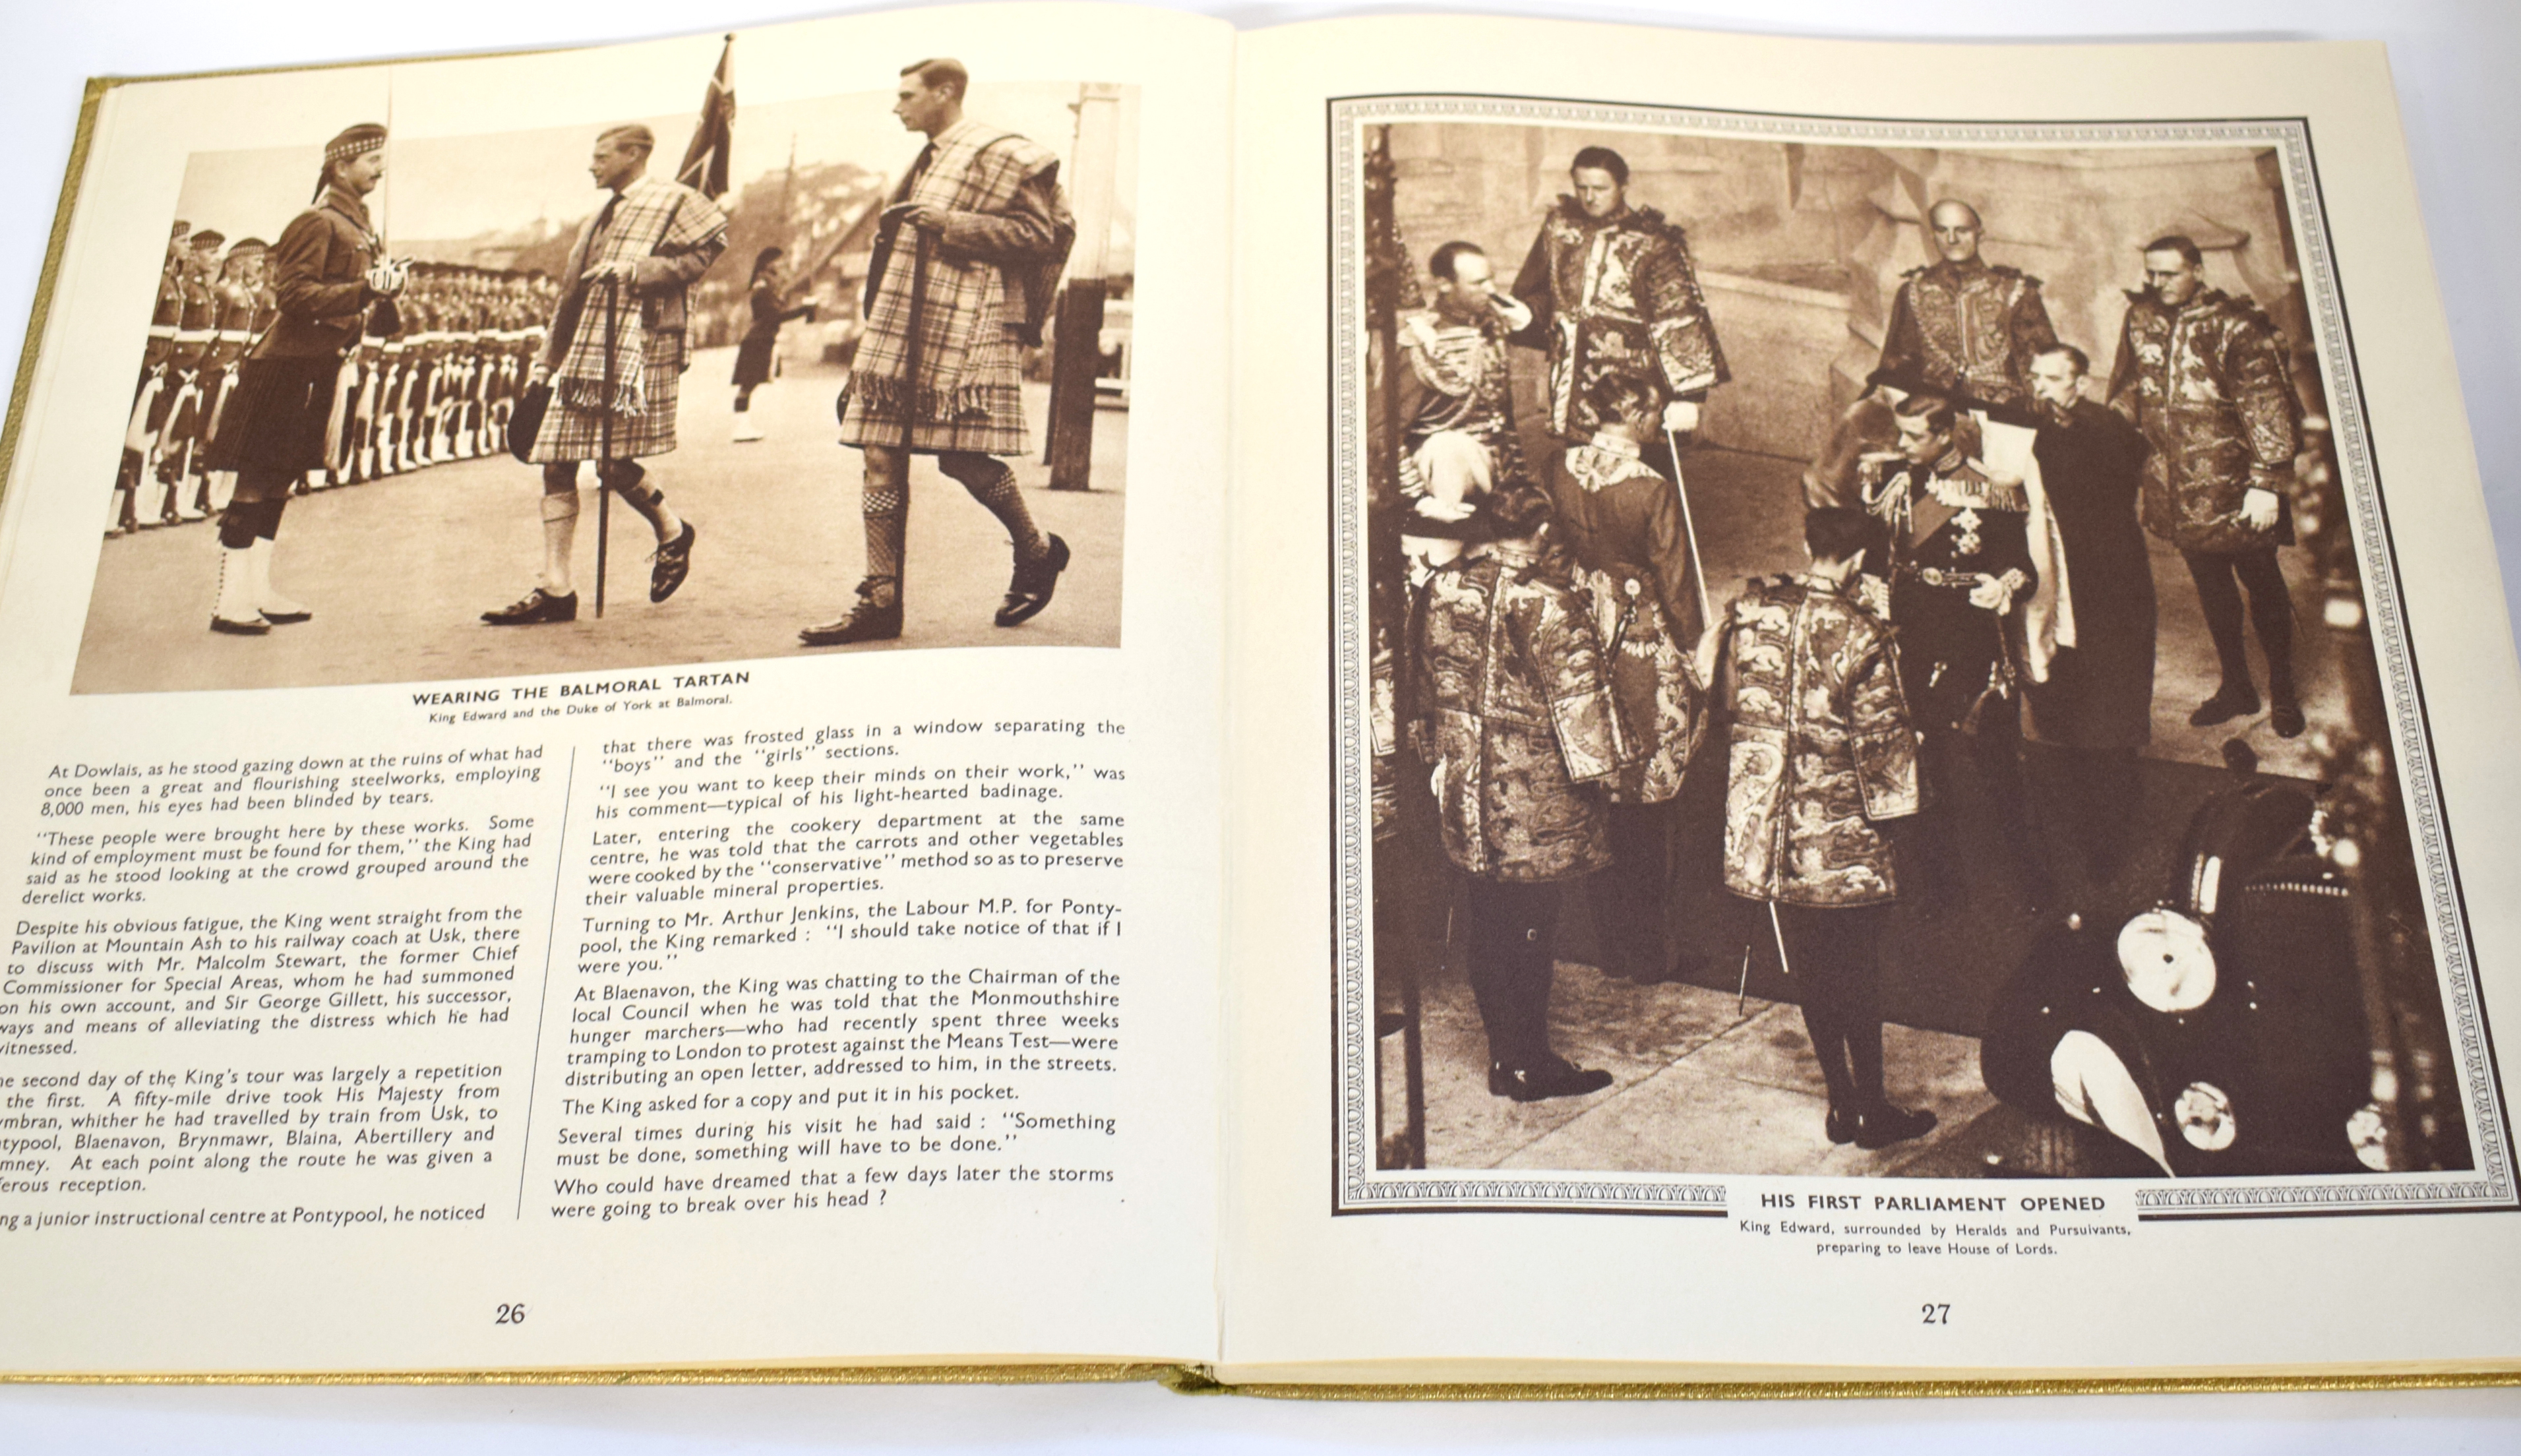 Coronation souvenir book for 1937 for George VI, published by The Daily Express - Image 3 of 4